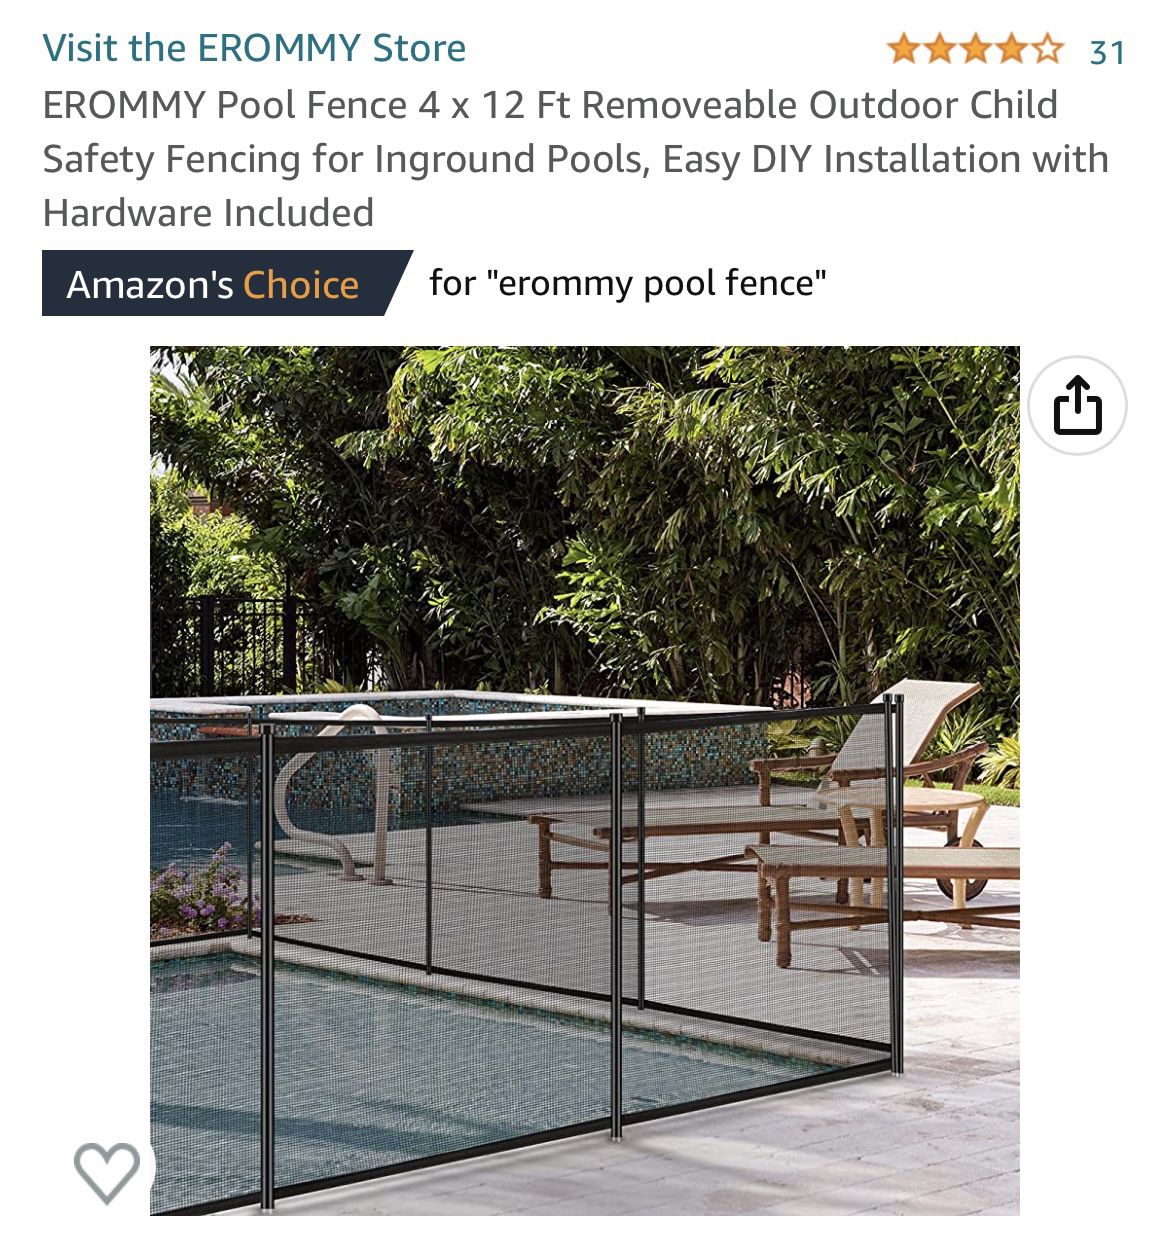 Erommy Pool Fence 4 x 12 Ft, Removable Outdoor Child Safety Fencing for Inground Pools